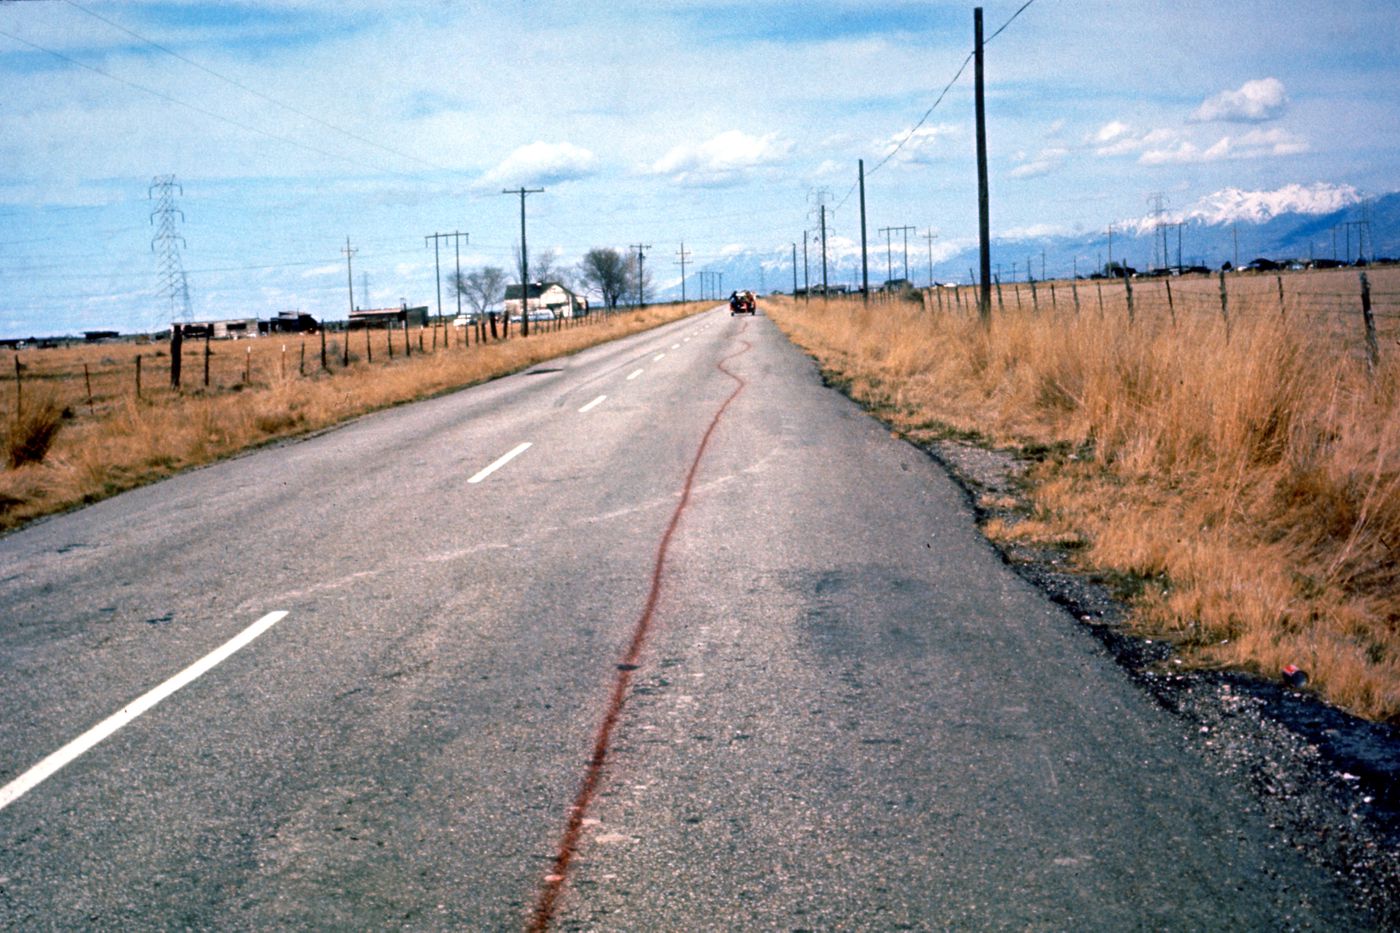 Photograph of line on road for Red Line